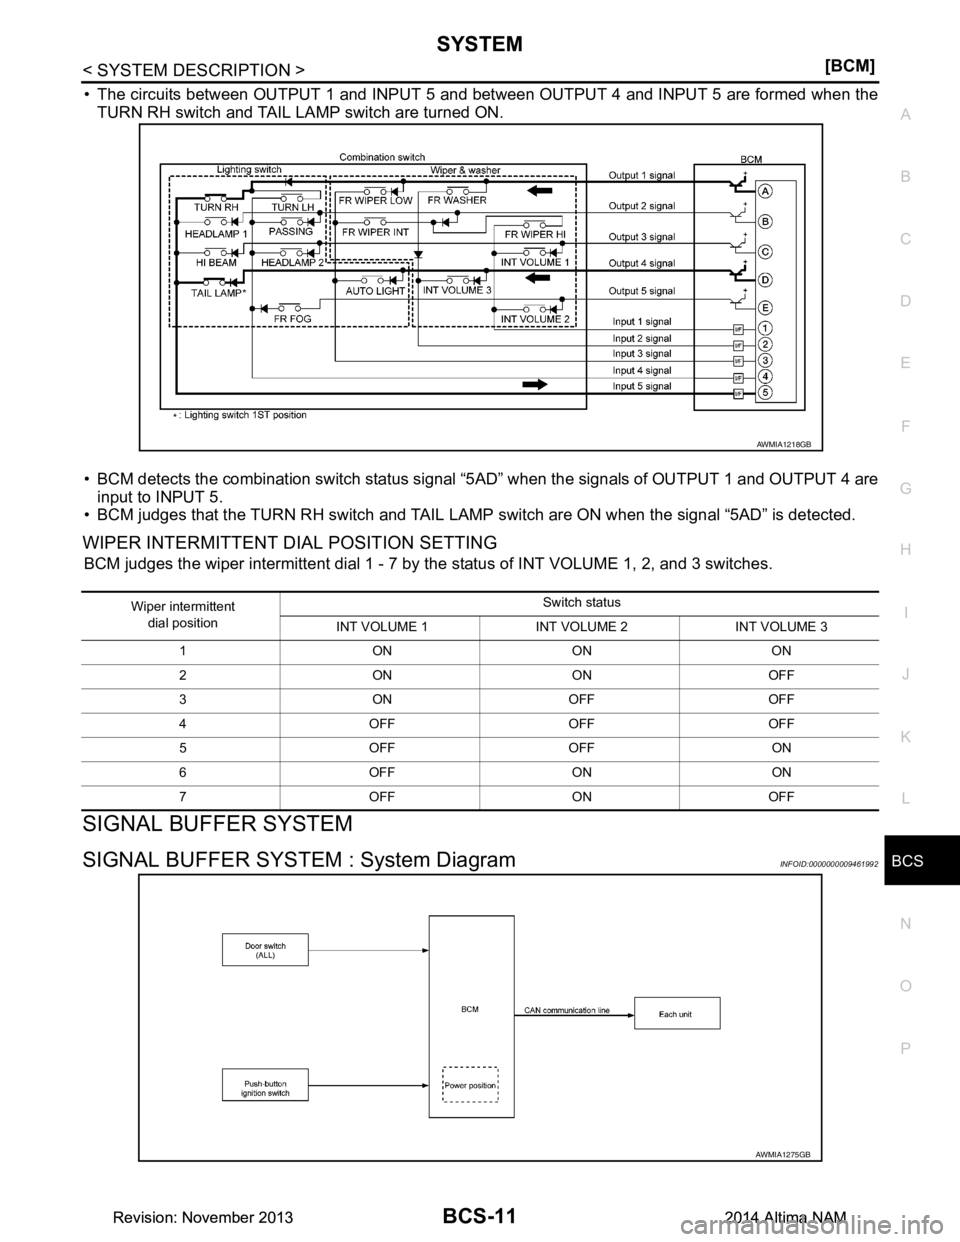 NISSAN TEANA 2014  Service Manual 
BCS
SYSTEMBCS-11
< SYSTEM DESCRIPTION > [BCM]
C 
D E
F
G H
I
J
K L
B 
A
O P
N
• The circuits between OUTPUT 1 and INPUT 5 and bet
ween OUTPUT 4 and INPUT 5 are formed when the
TURN RH switch and TA